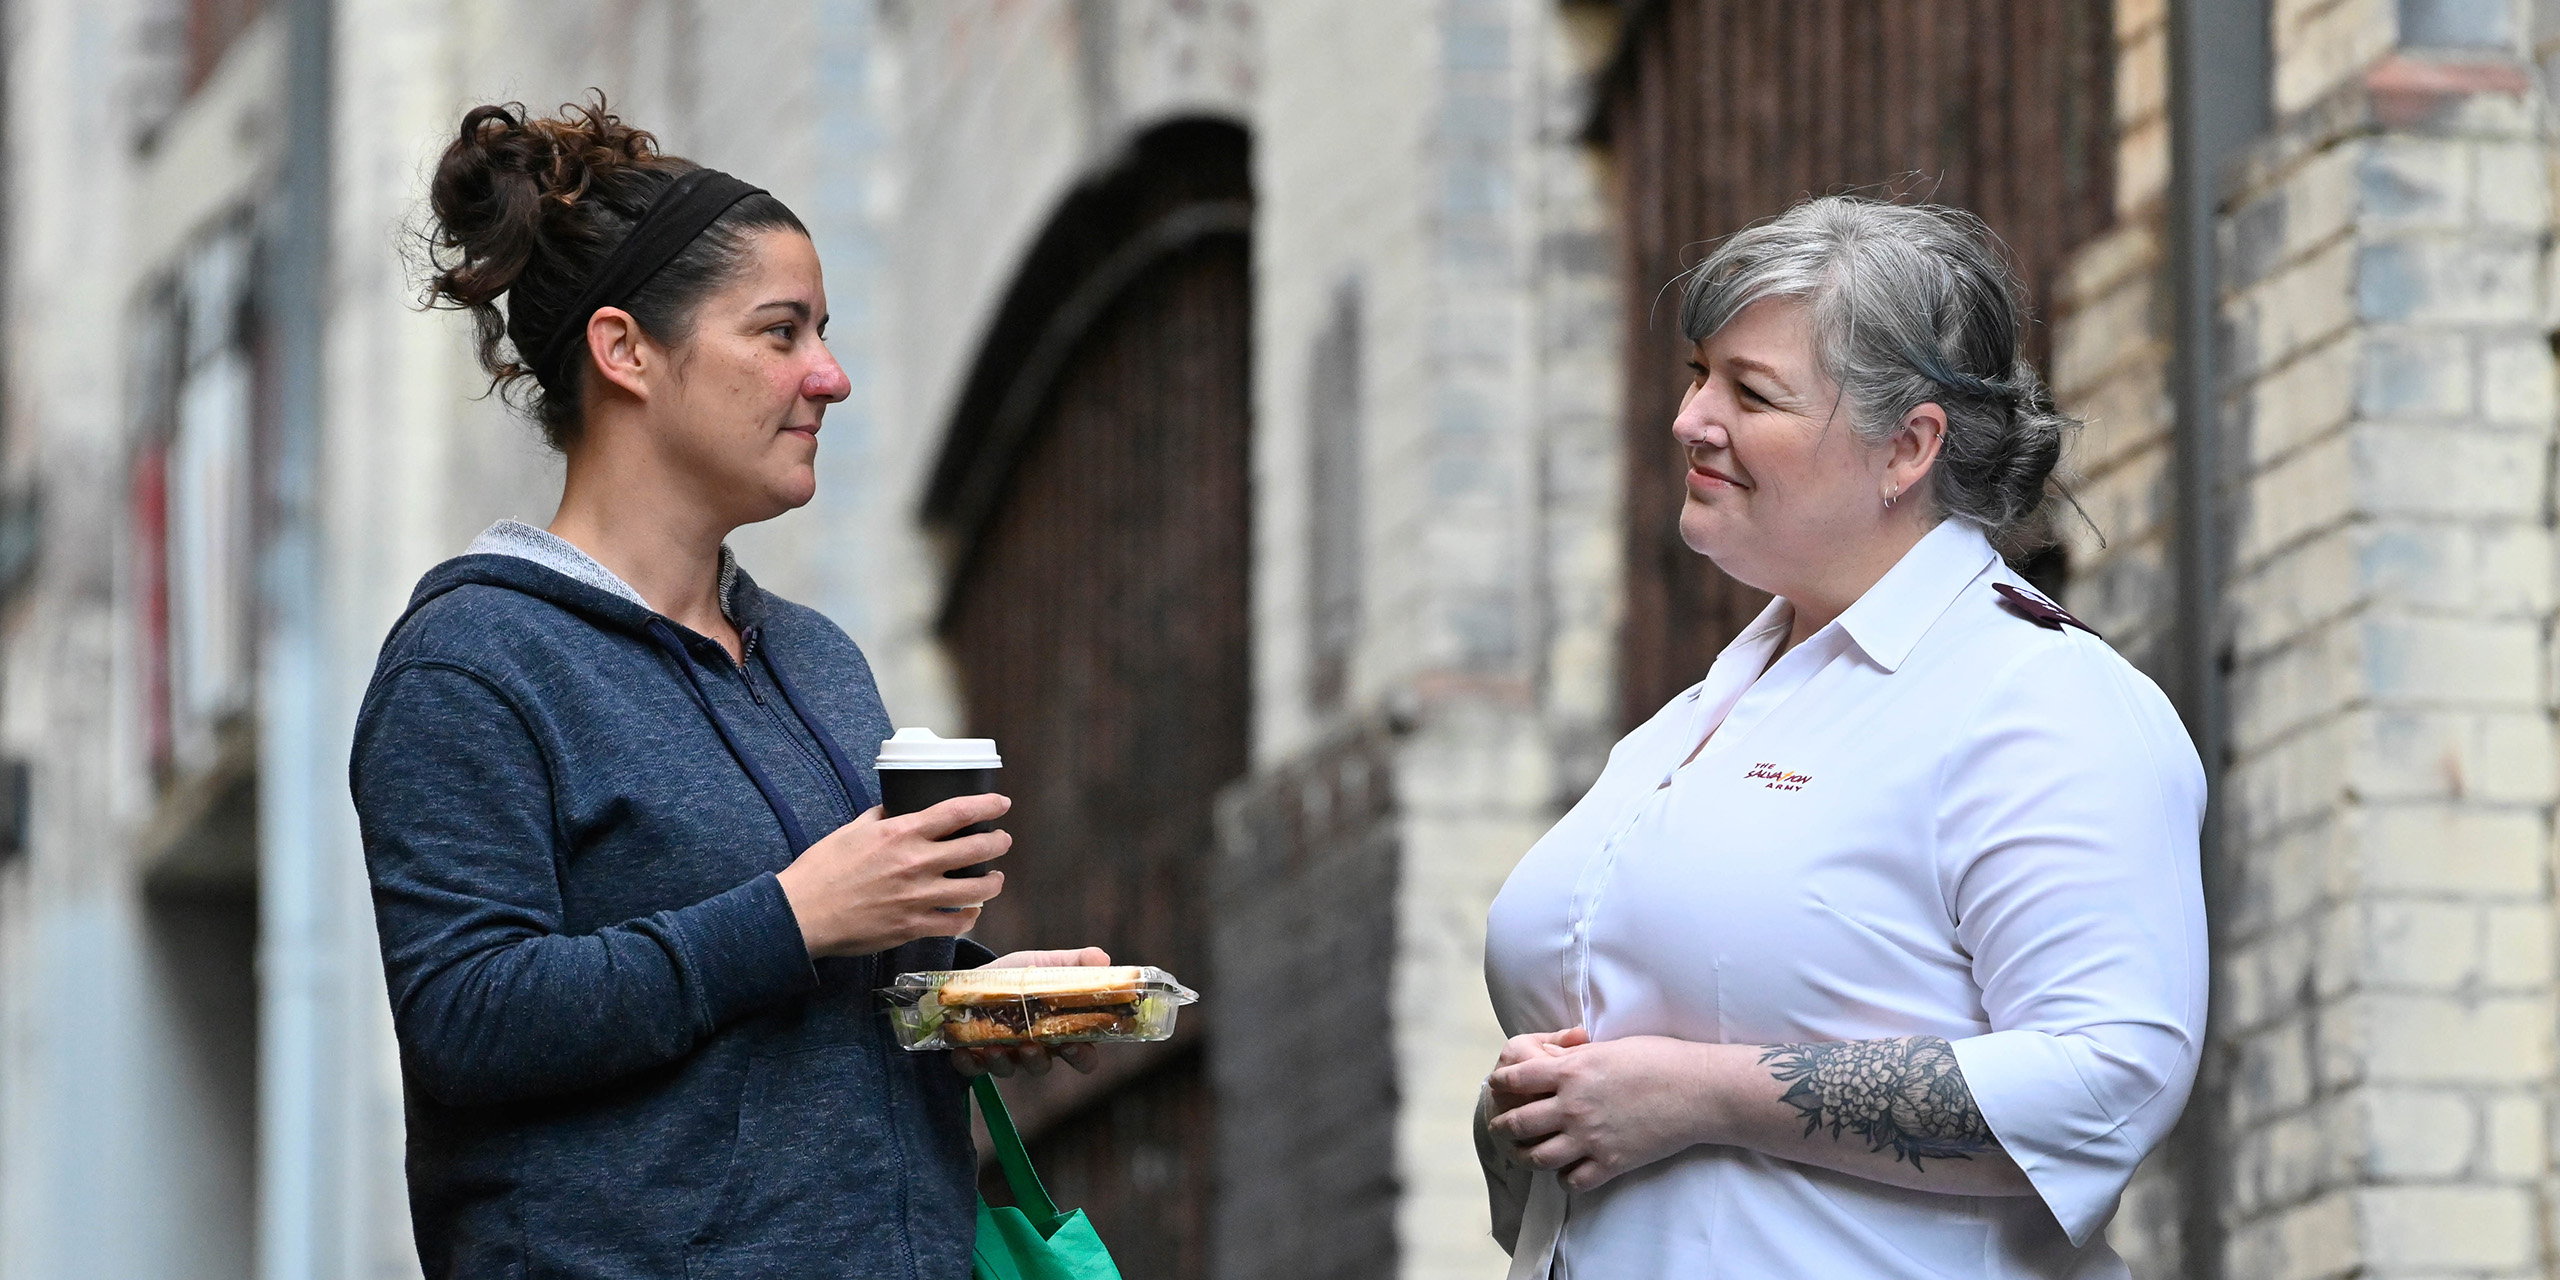 A Salvo chatting with a woman with a hot drink in the street